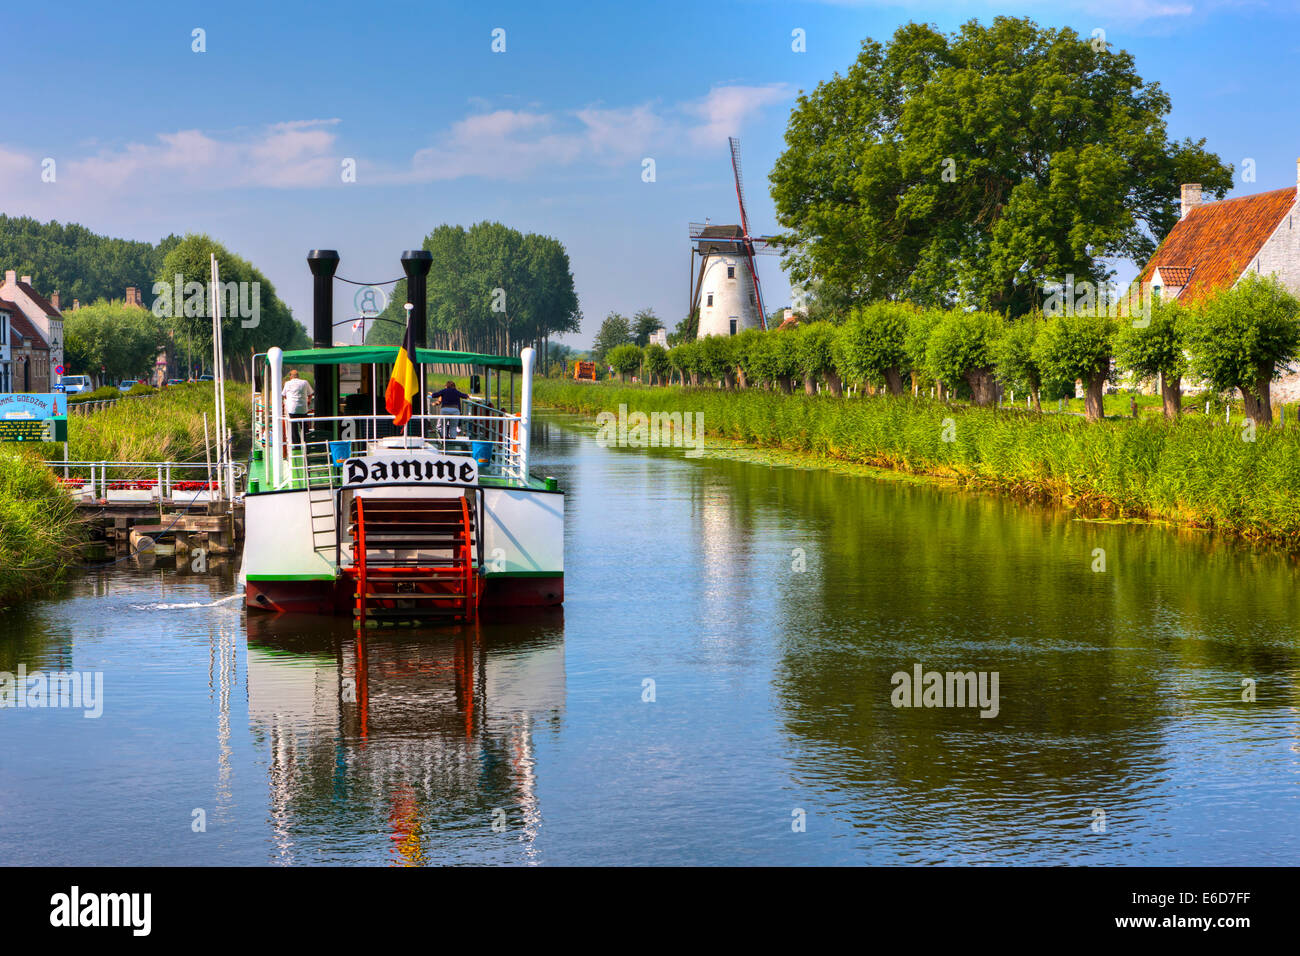 Belgium, Flanders, West Flanders, Bruges, canal at Damme with old boat Stock Photo